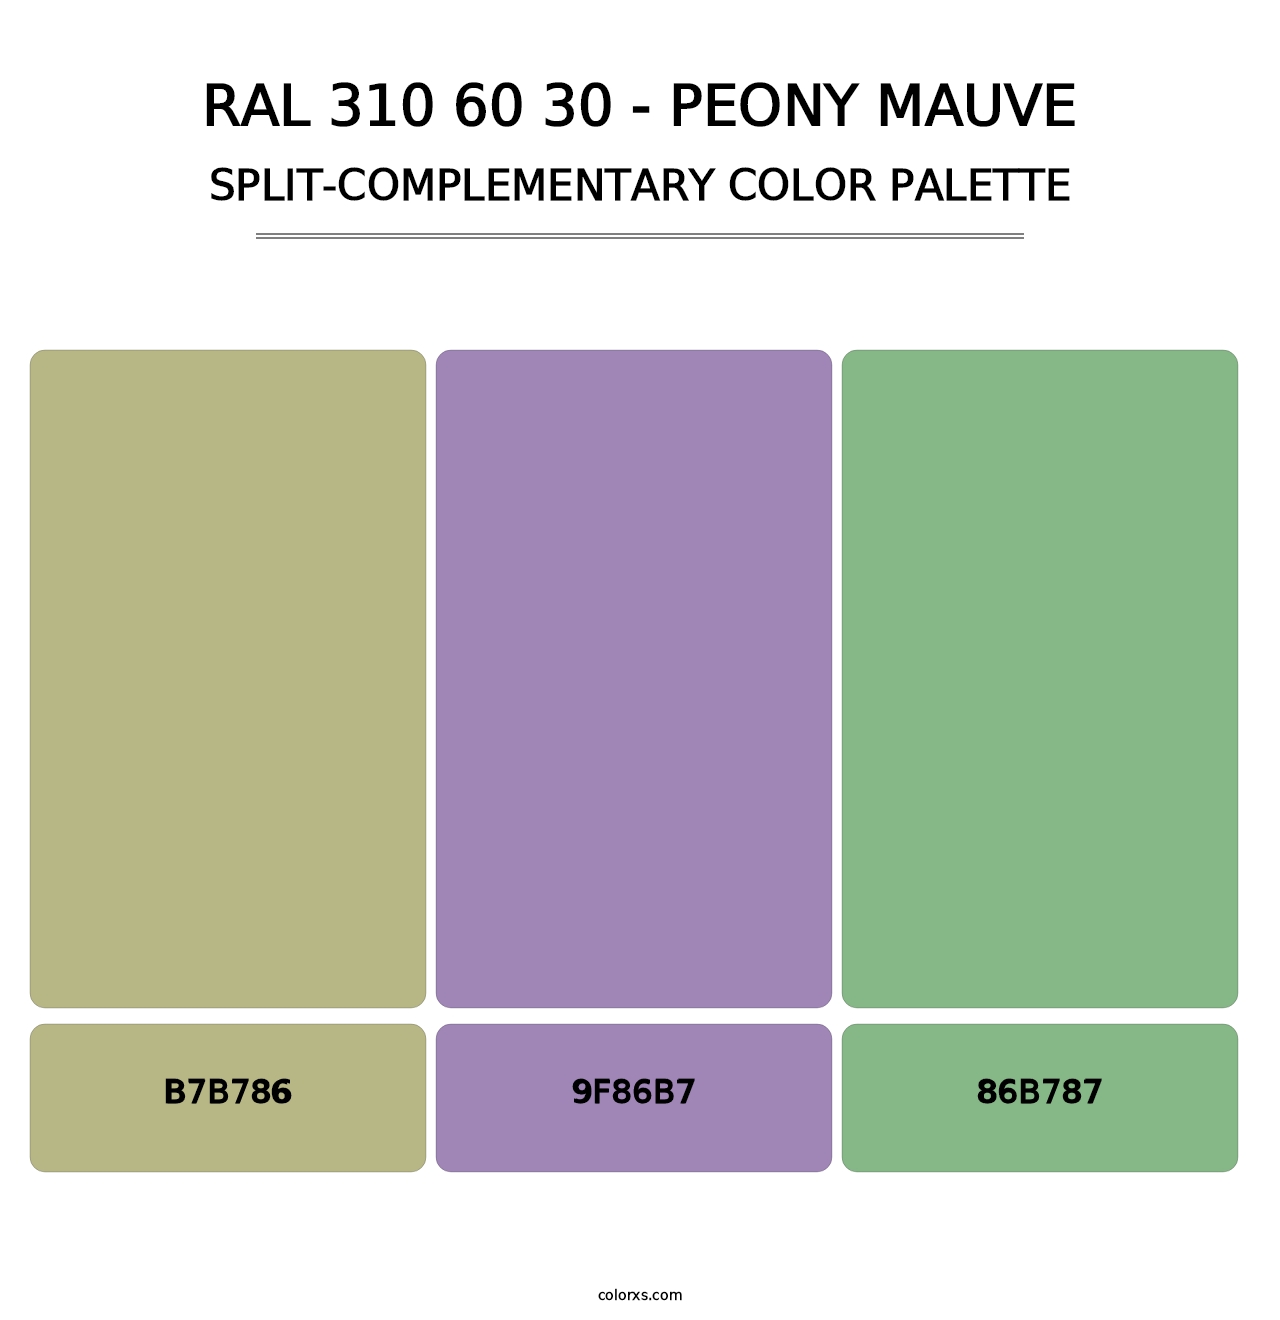 RAL 310 60 30 - Peony Mauve - Split-Complementary Color Palette